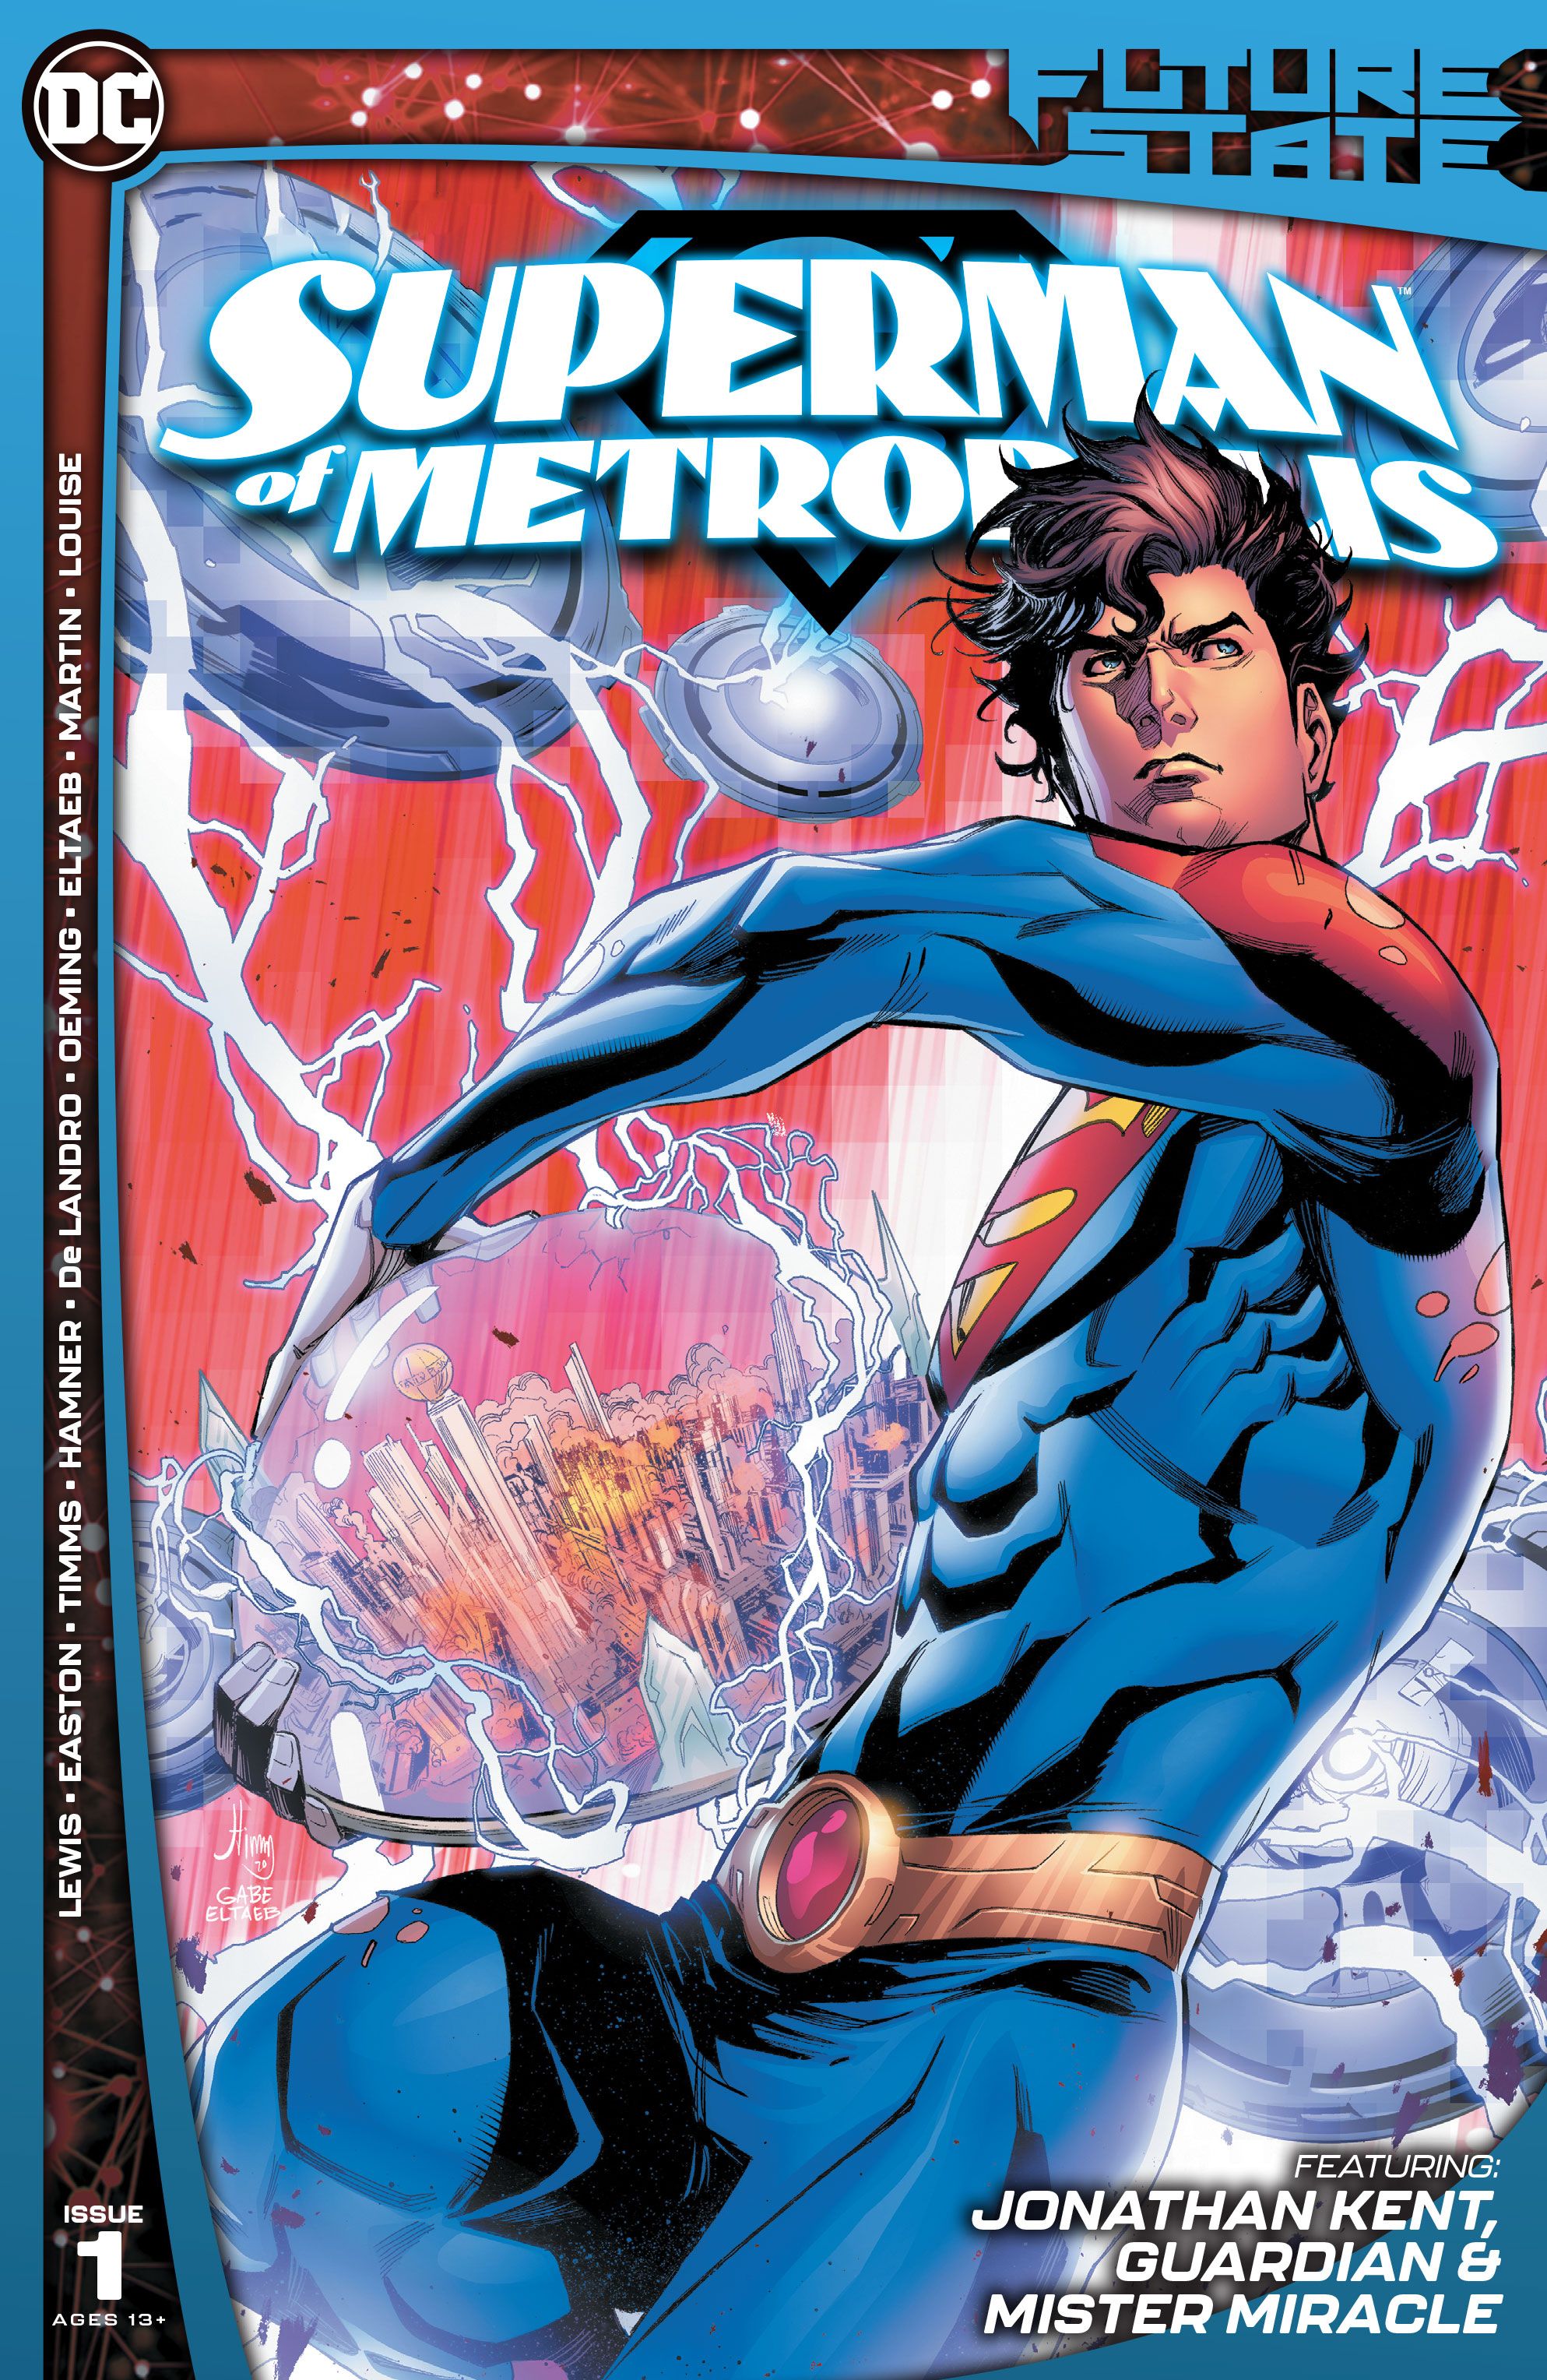 The New Superman Is Trying To Keep Metropolis From Becoming Gotham